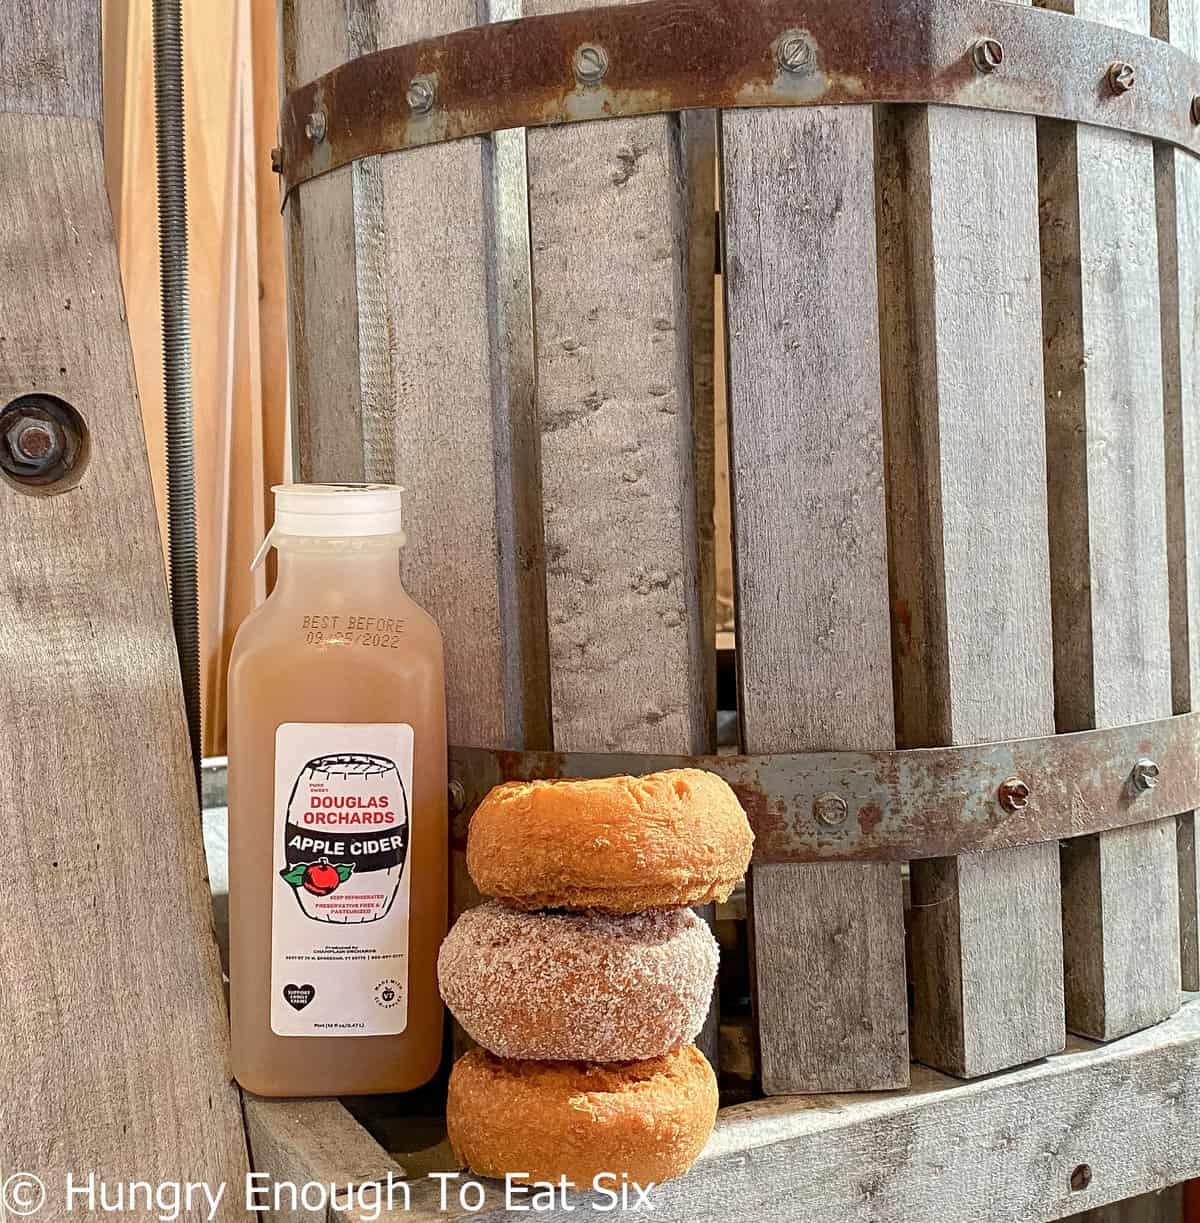 Donuts and bottle of cider next to wooden apple press.